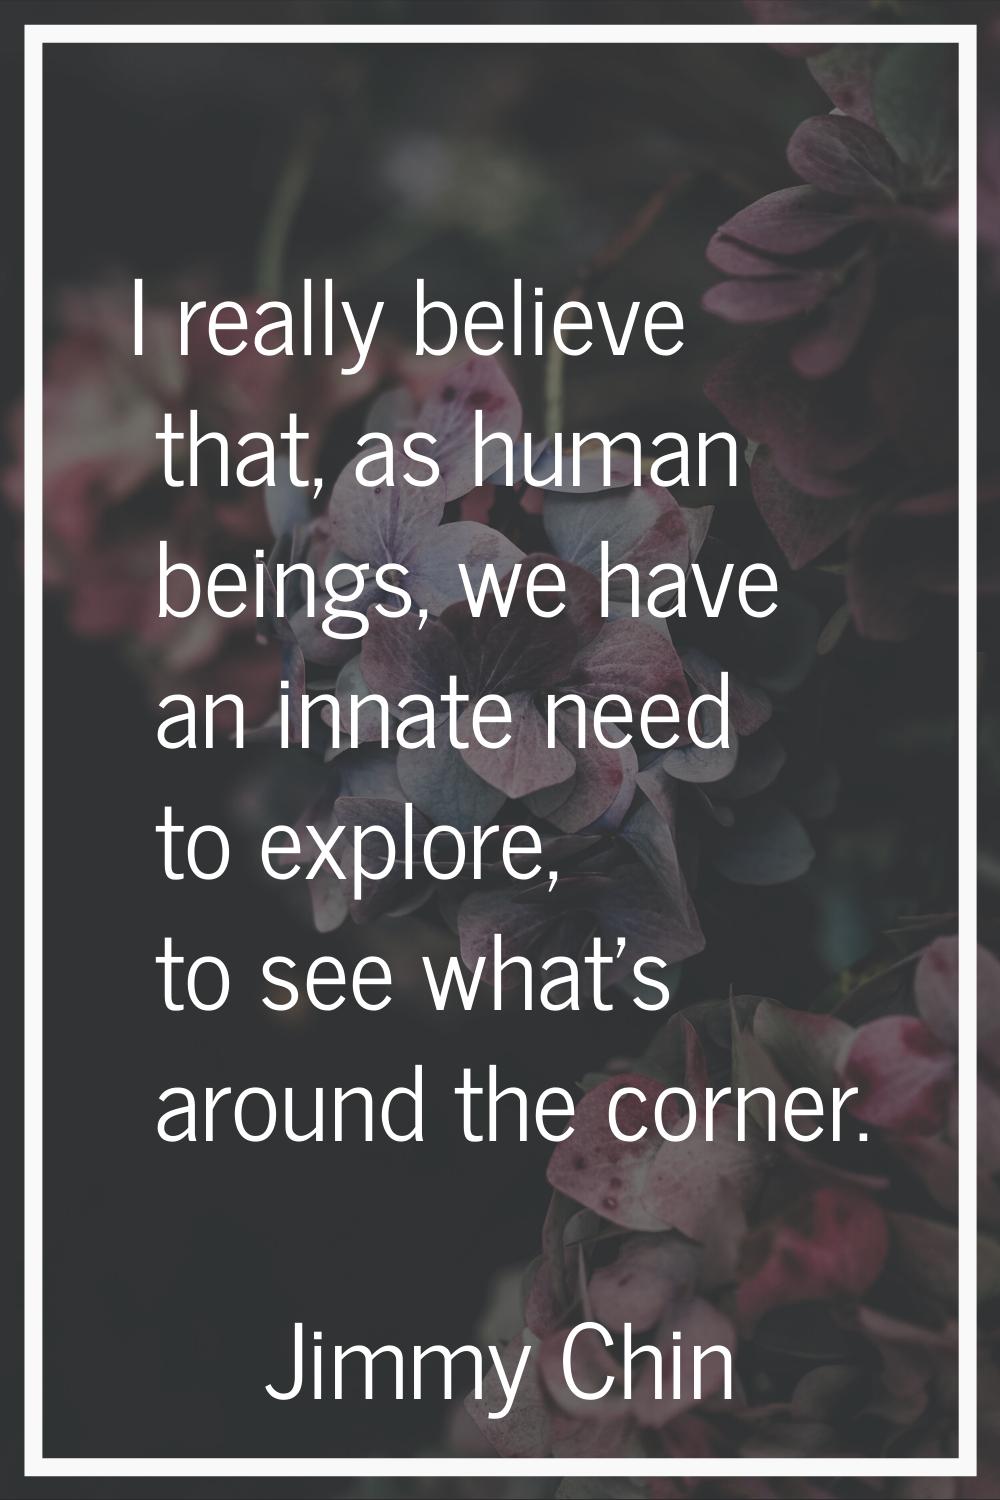 I really believe that, as human beings, we have an innate need to explore, to see what's around the